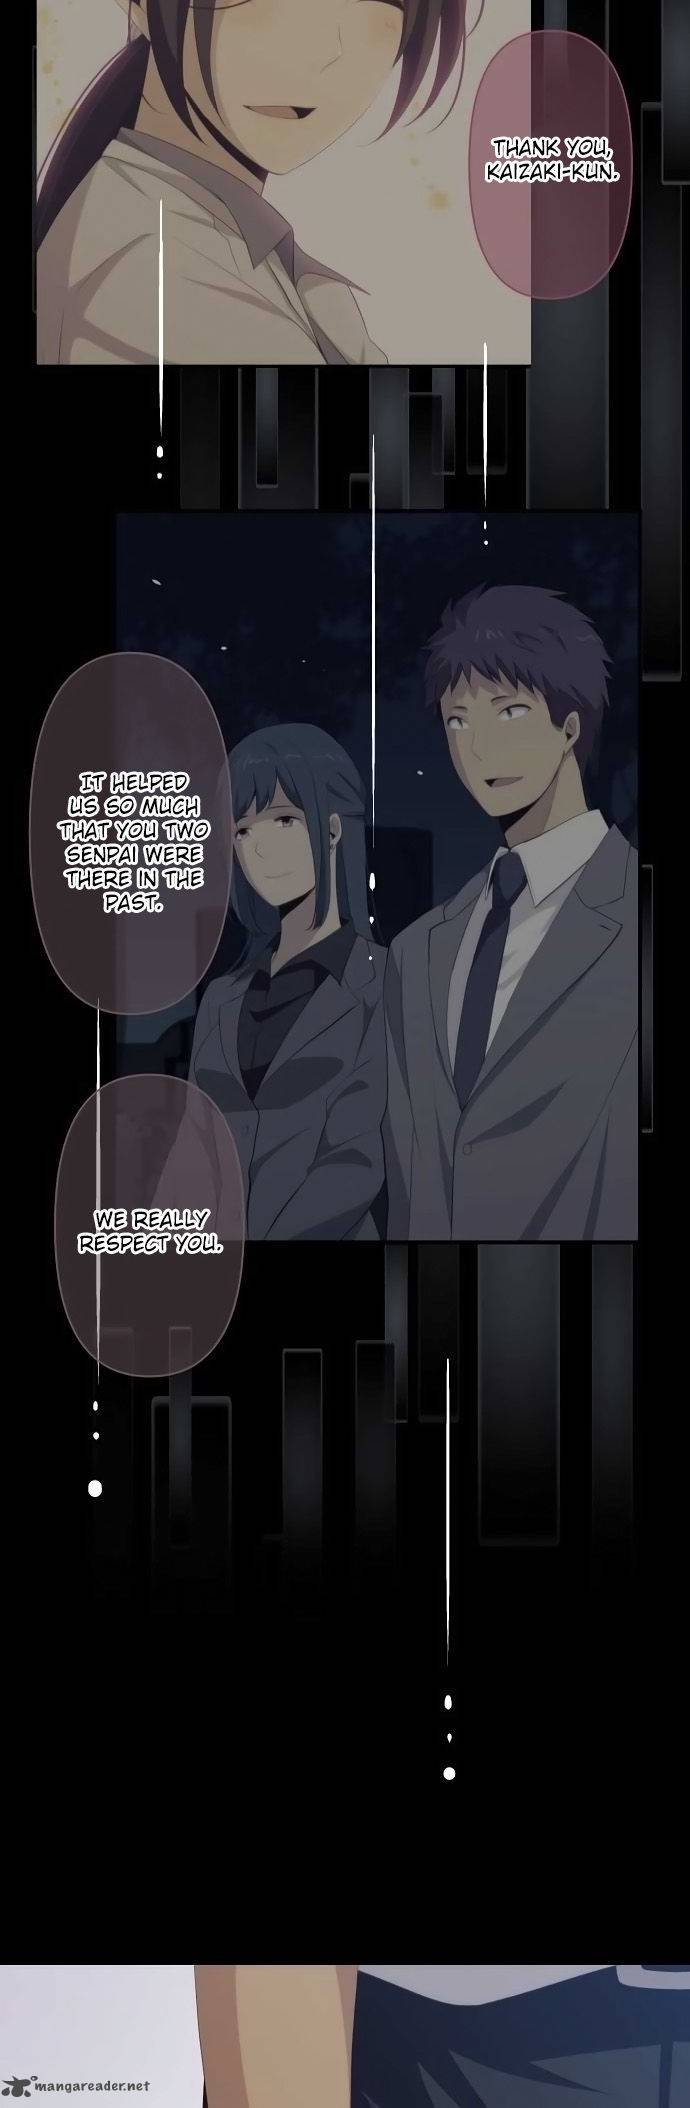 Relife 145 28